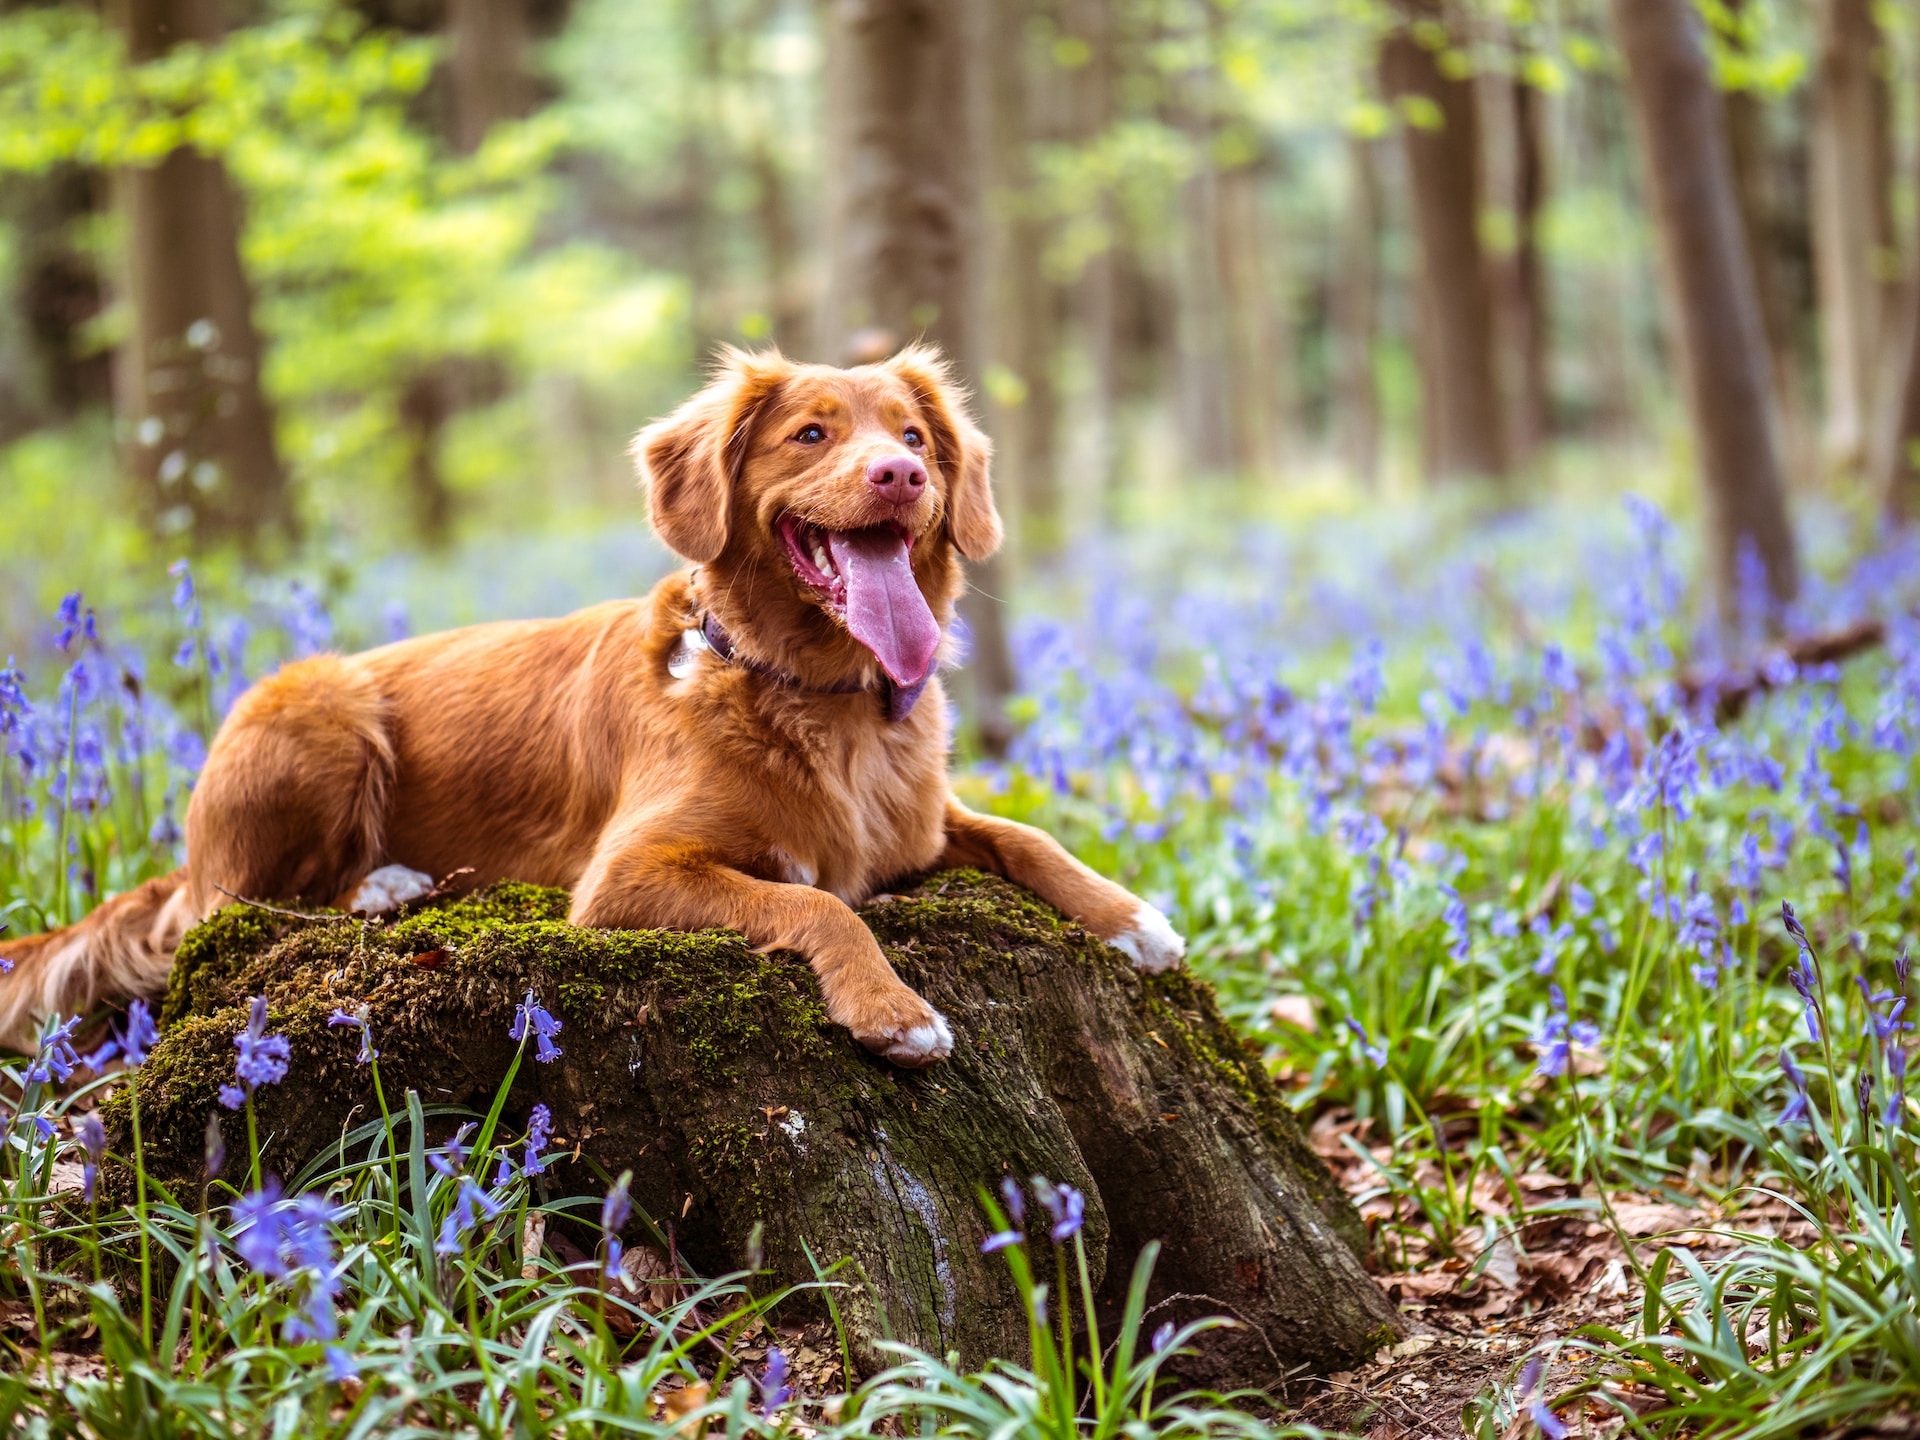 Tan coloured dog laying on a tree stump in a bluebell field.